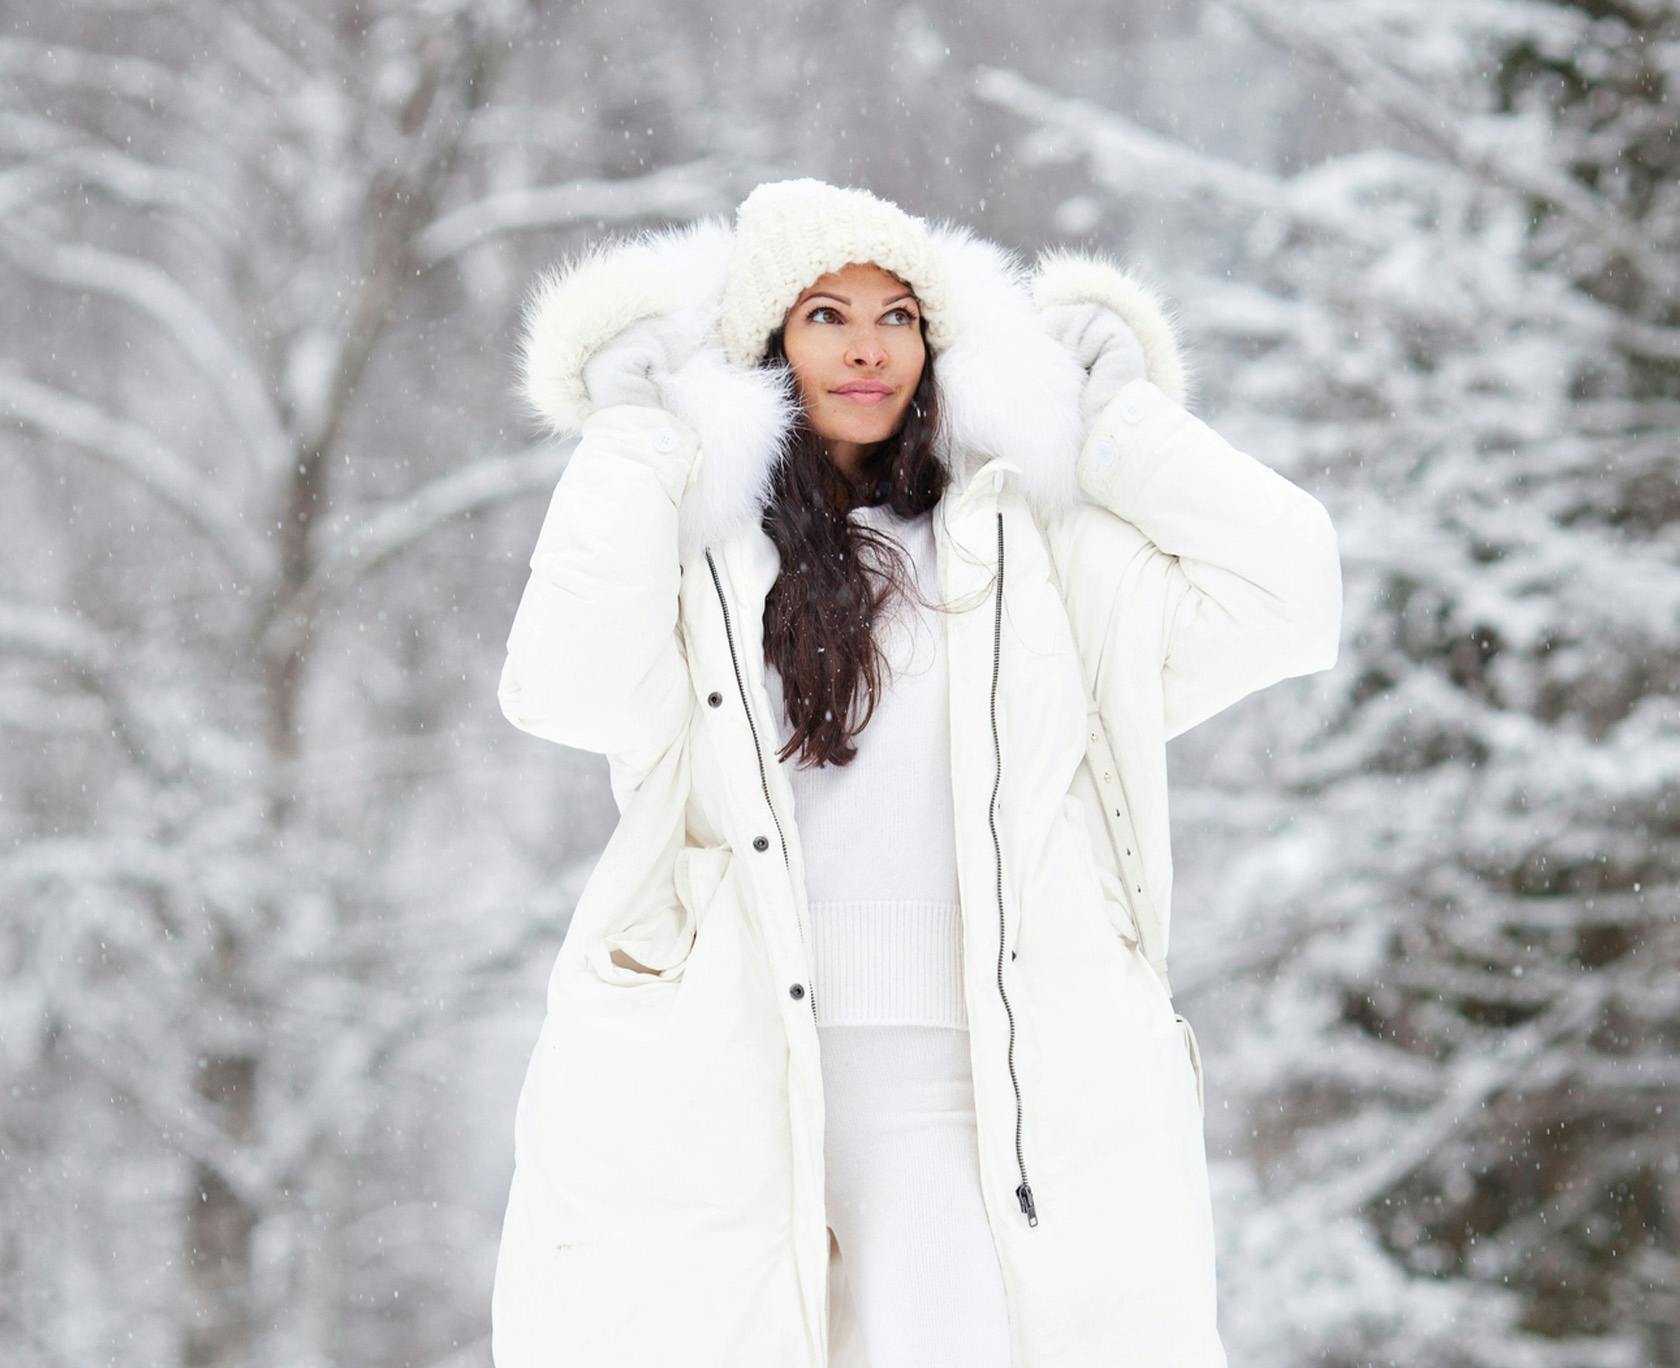 woman in white coat and hat standing in snow